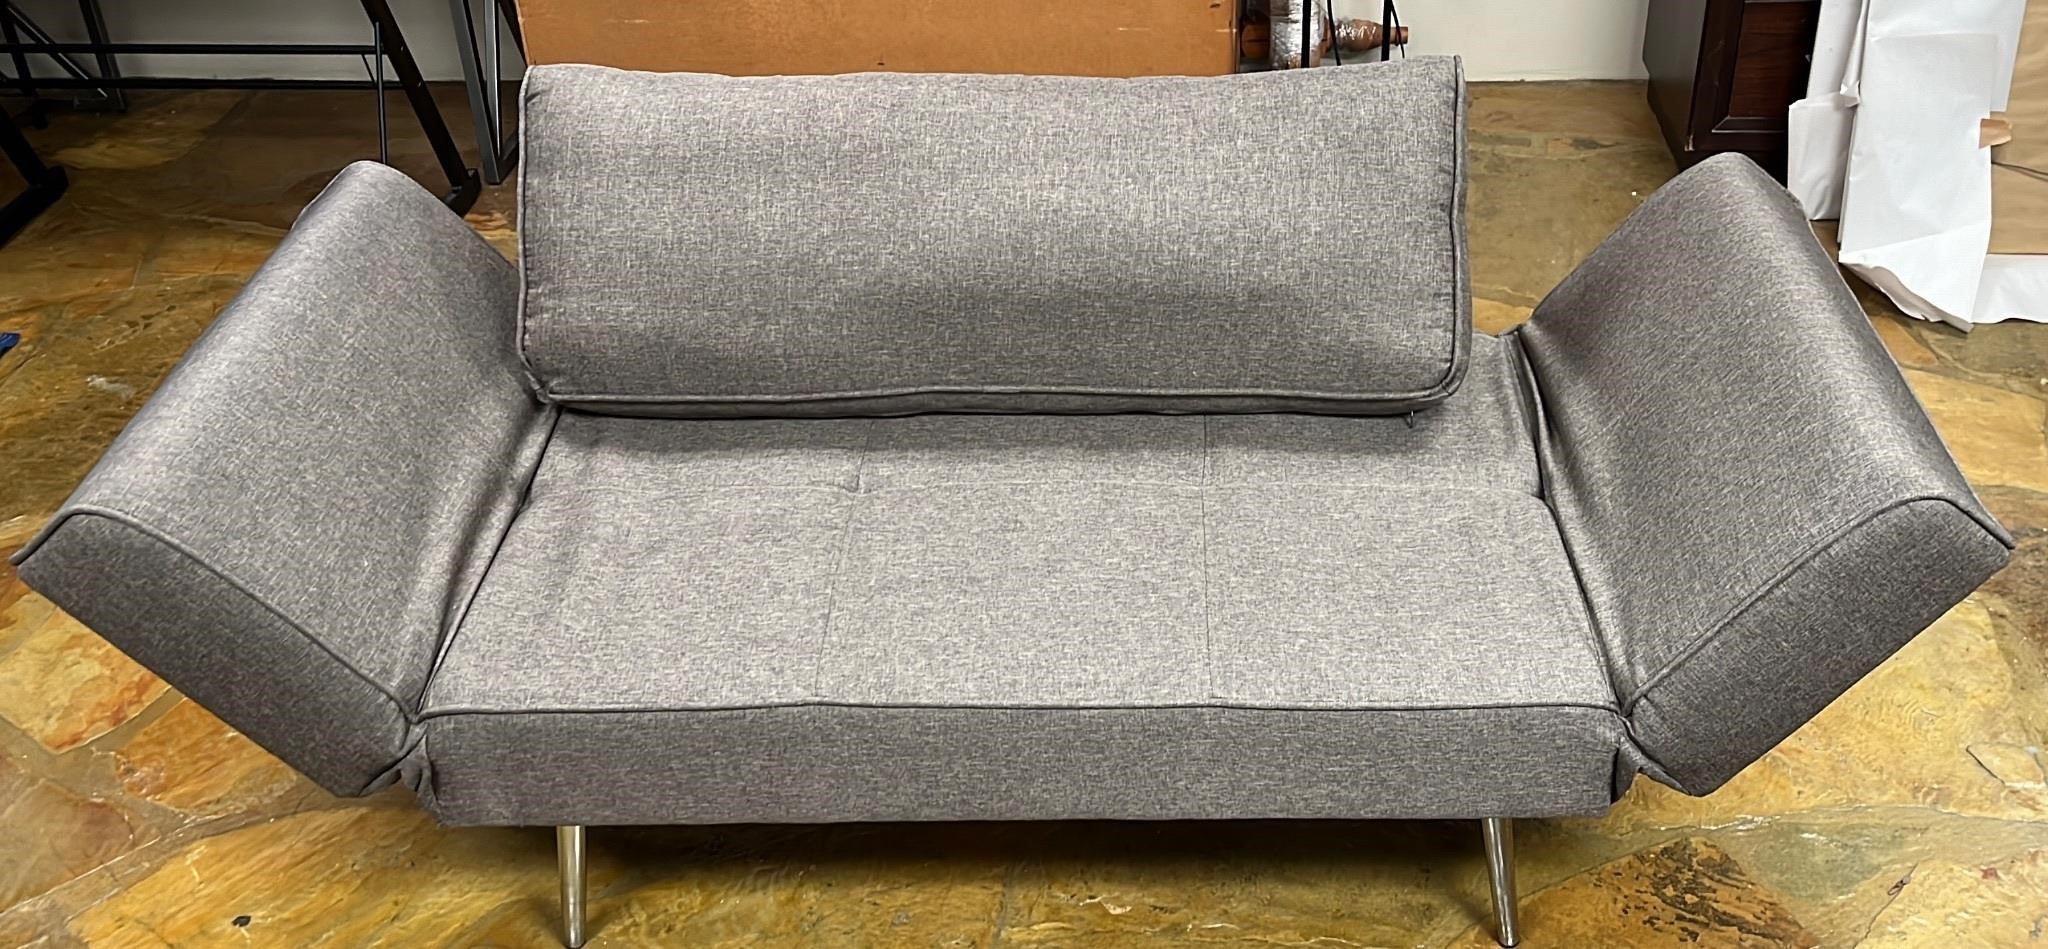 Gray Couch/Futon with pillow